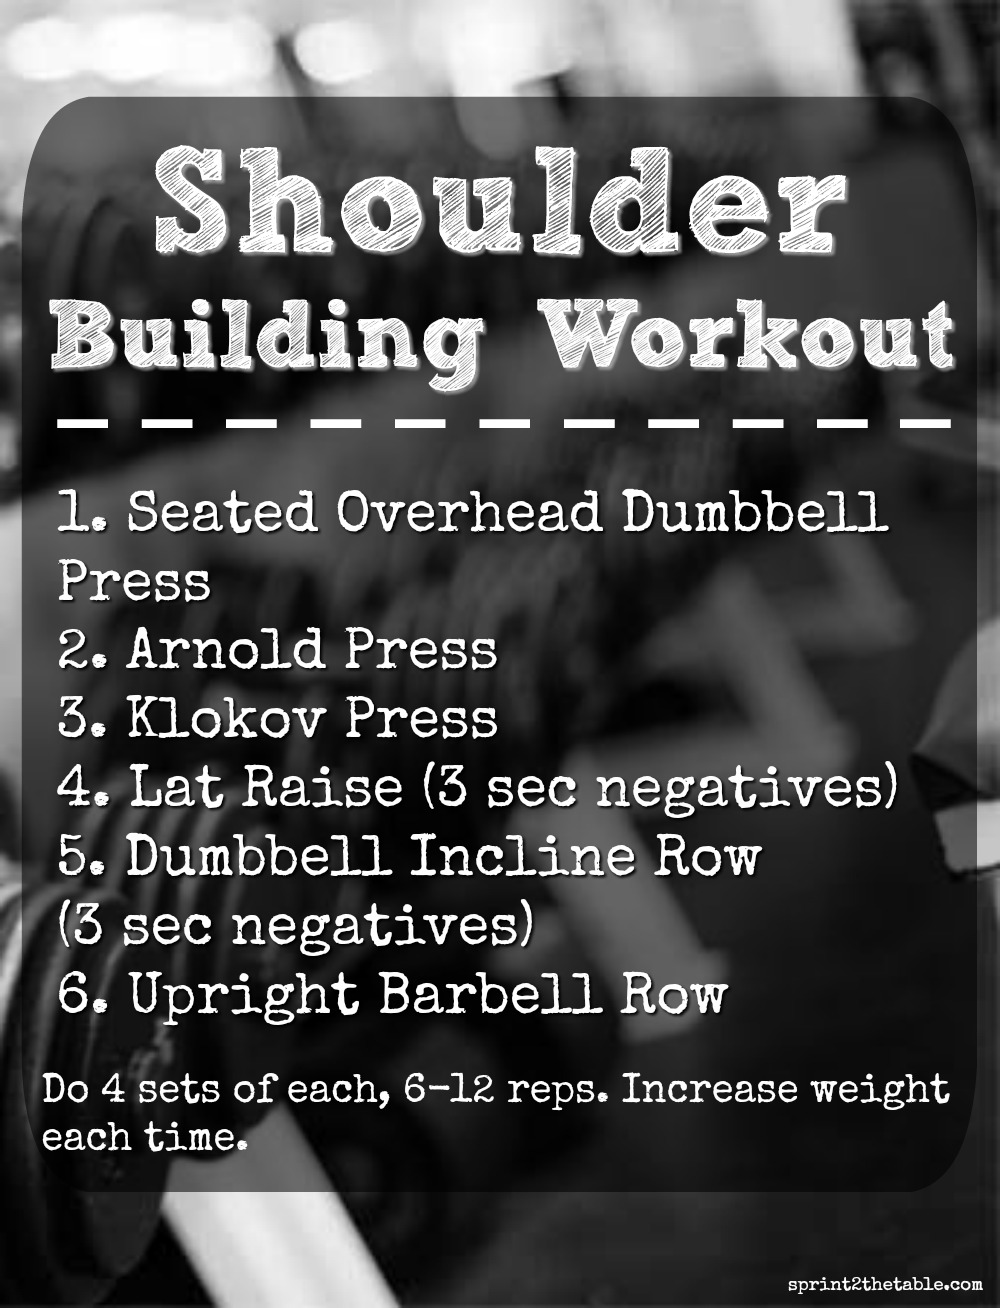 Have you ever looked at fitness models and wondered how they got those gorgeous shoulder caps? Here's a workout that will help you develop yours!